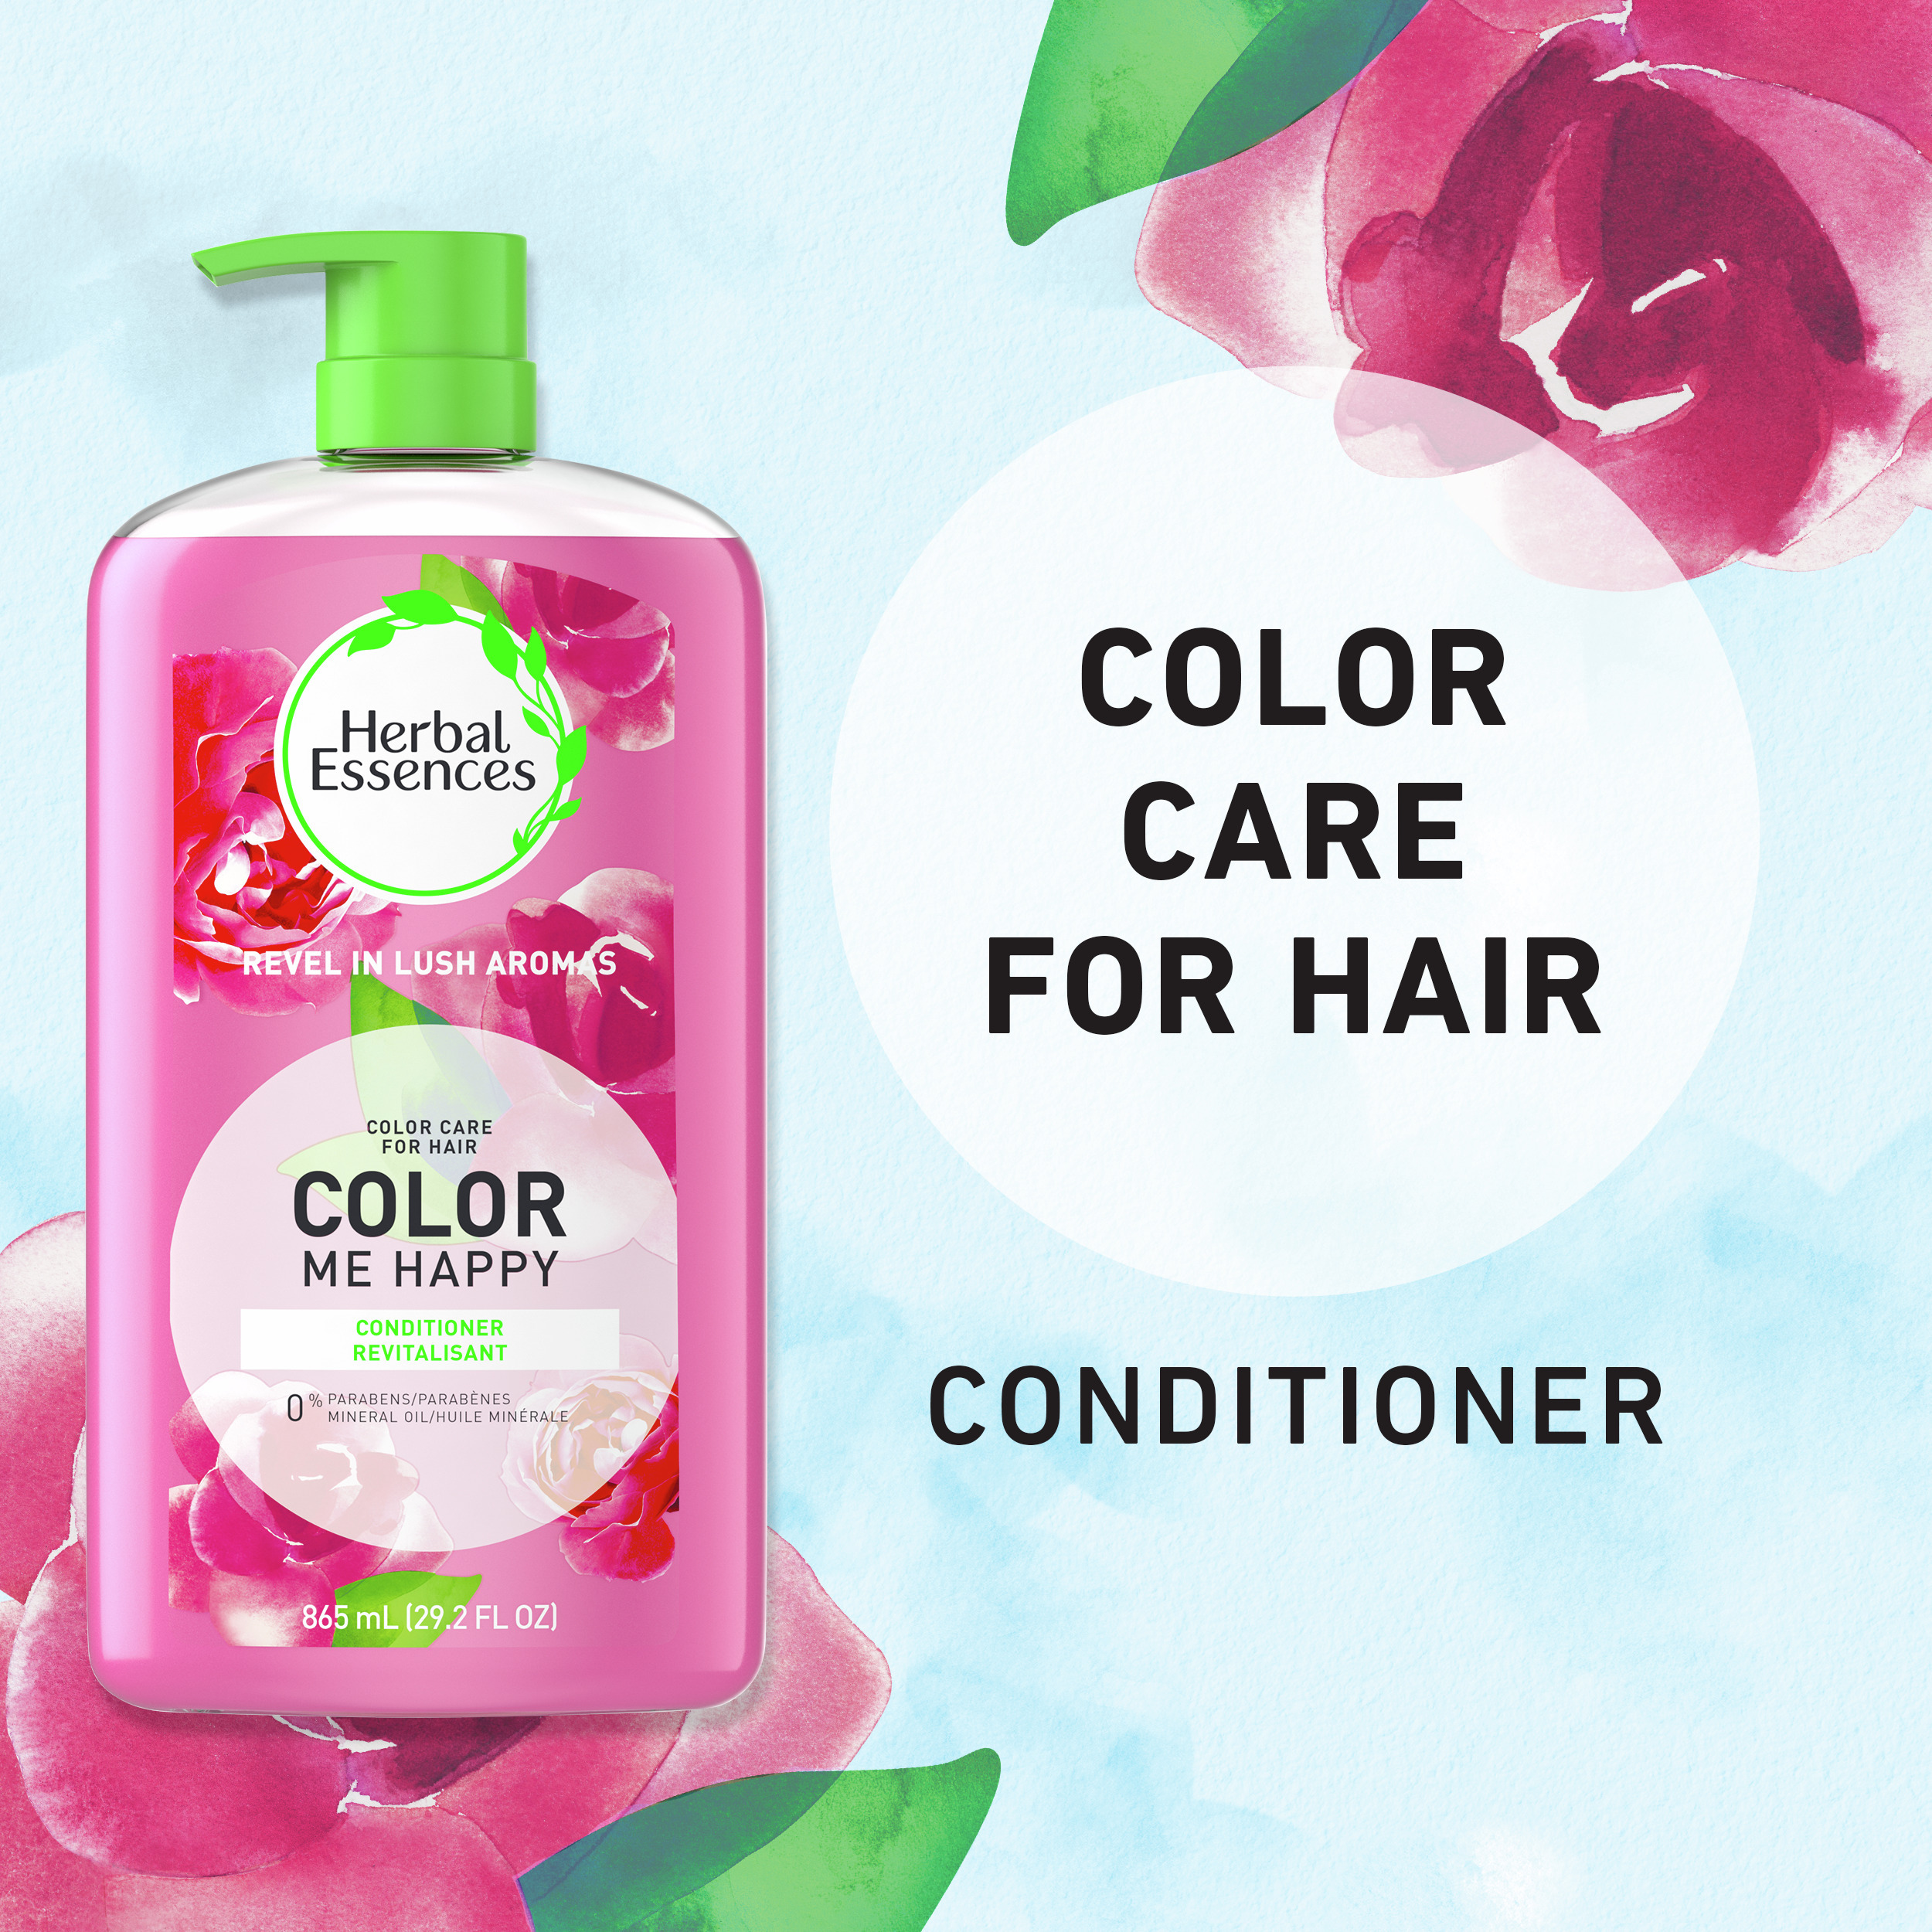 Herbal Essences Color Me Happy Conditioner for Color-Treated Hair, 29.2 fl oz - image 2 of 7